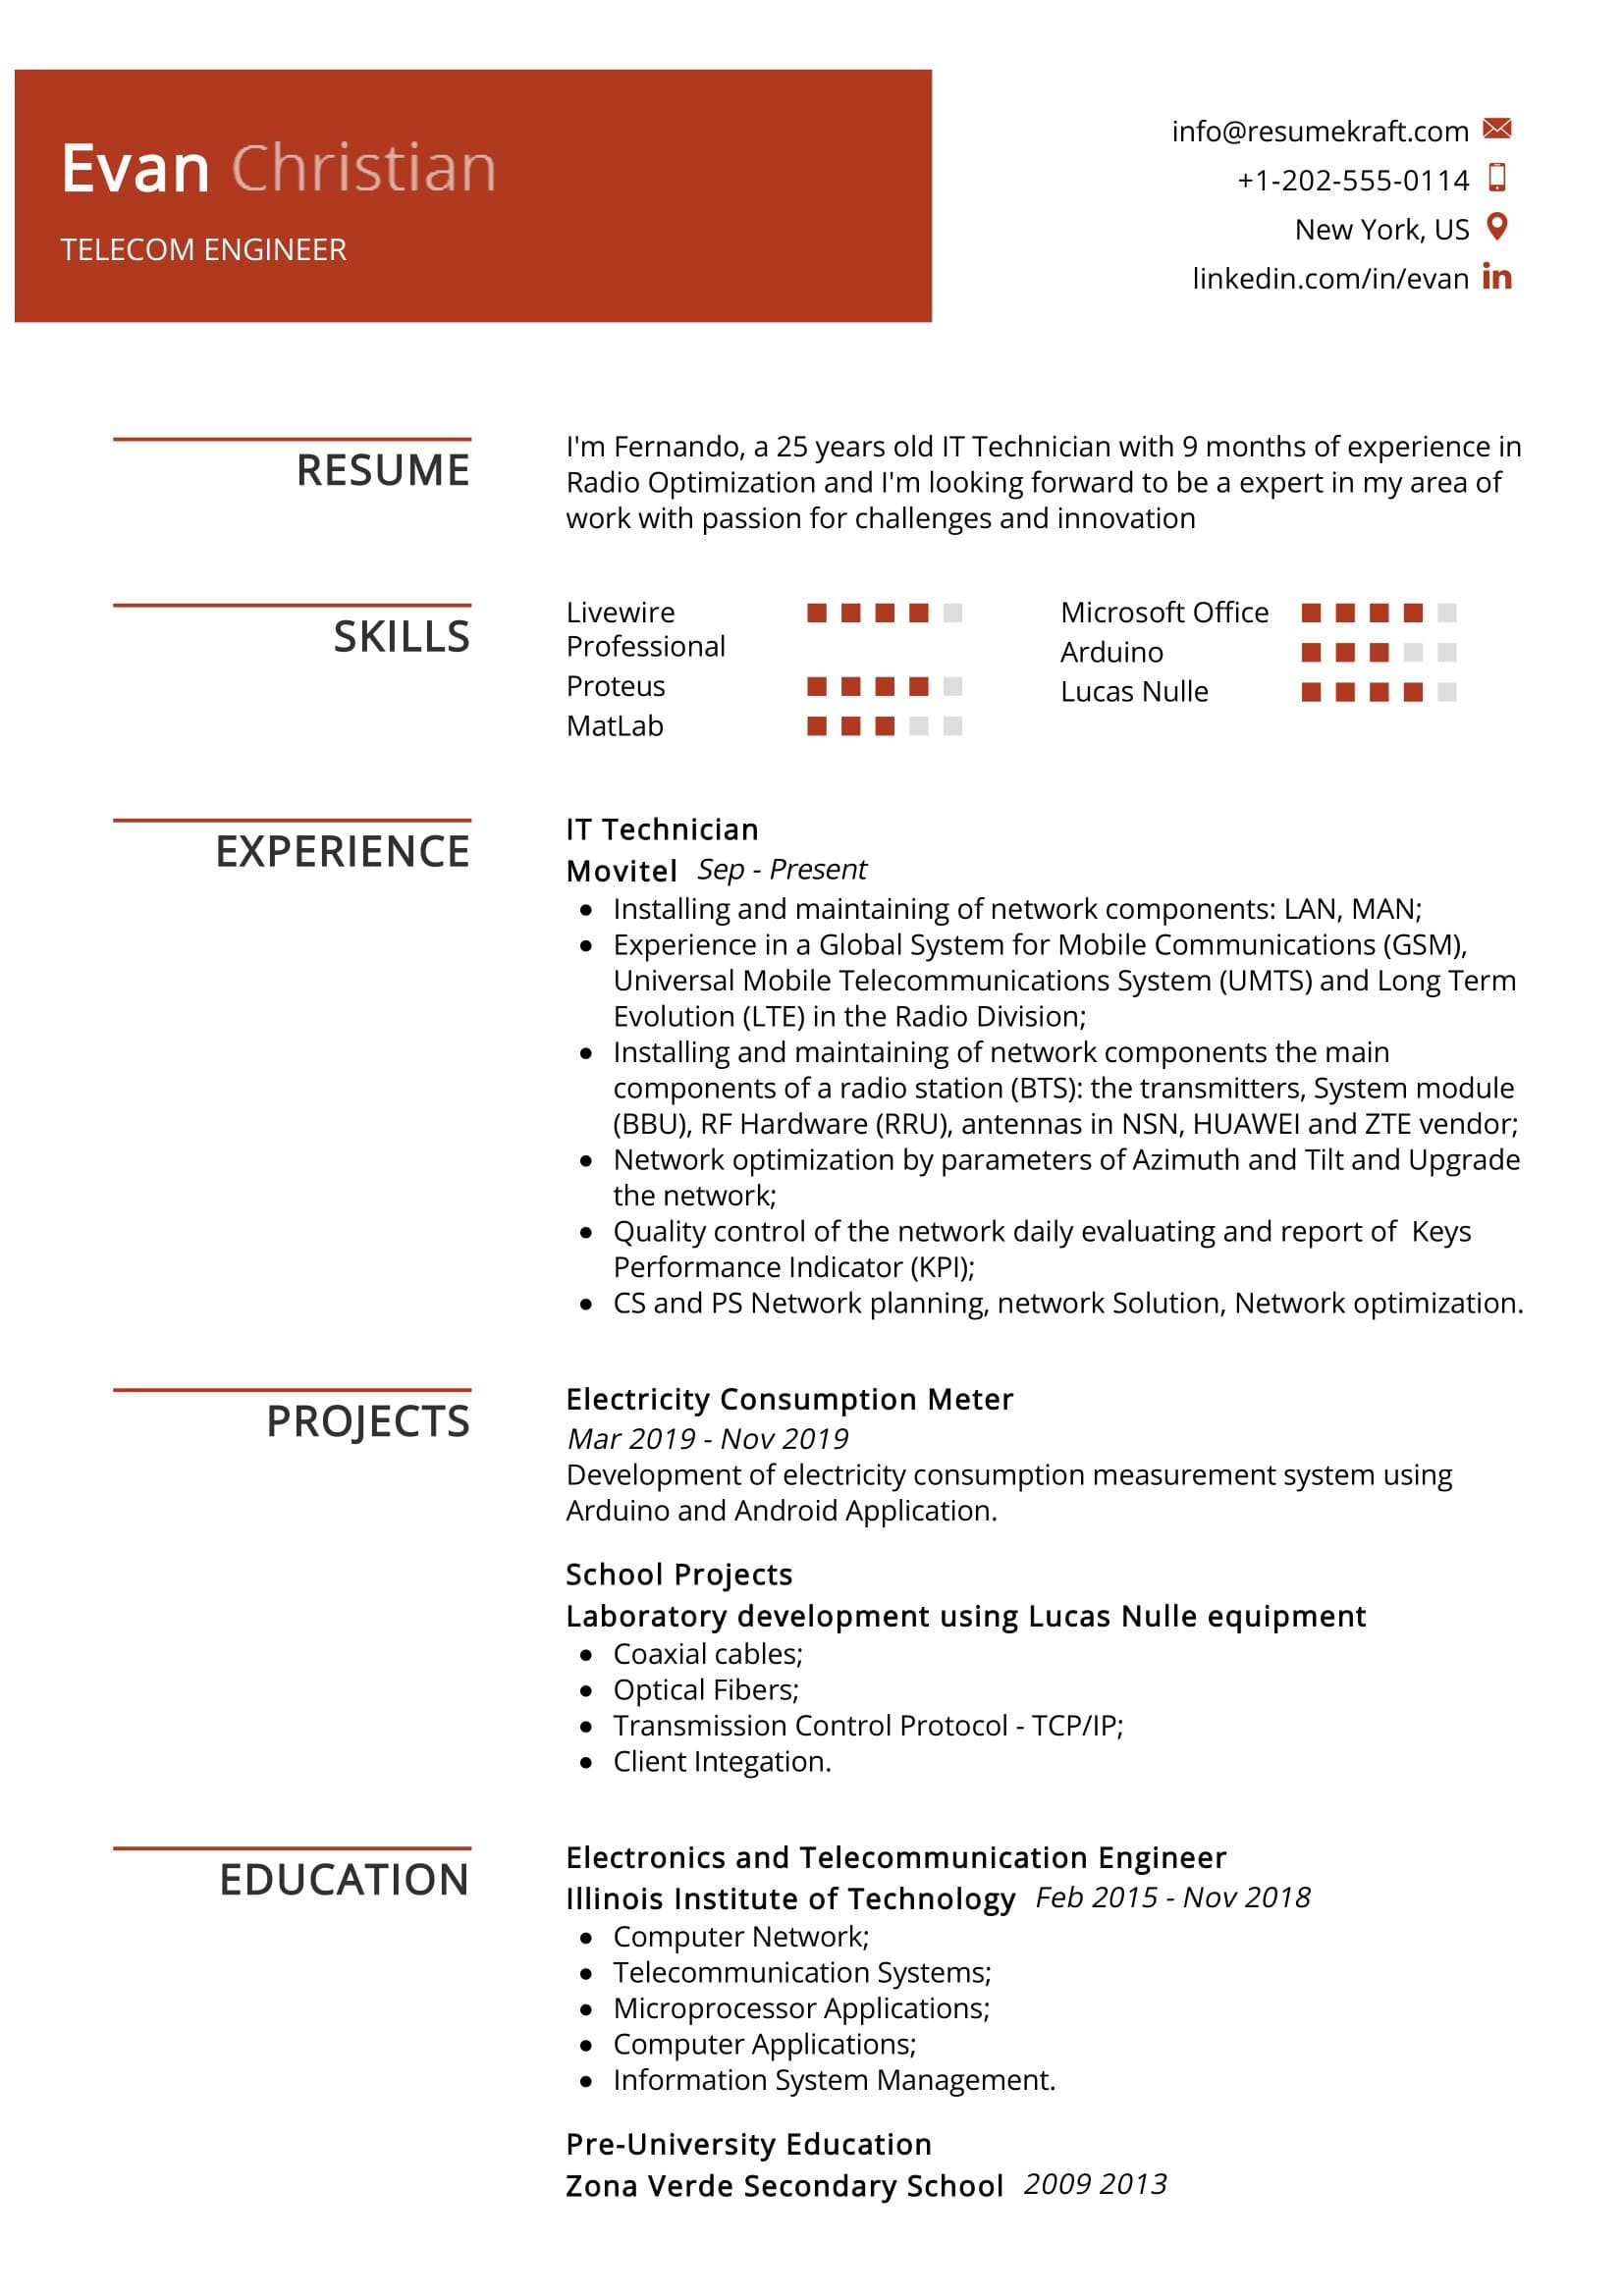 Telecom Project Manager Resume Sample India Telecom Engineer Resume Sample 2022 Writing Tips – Resumekraft